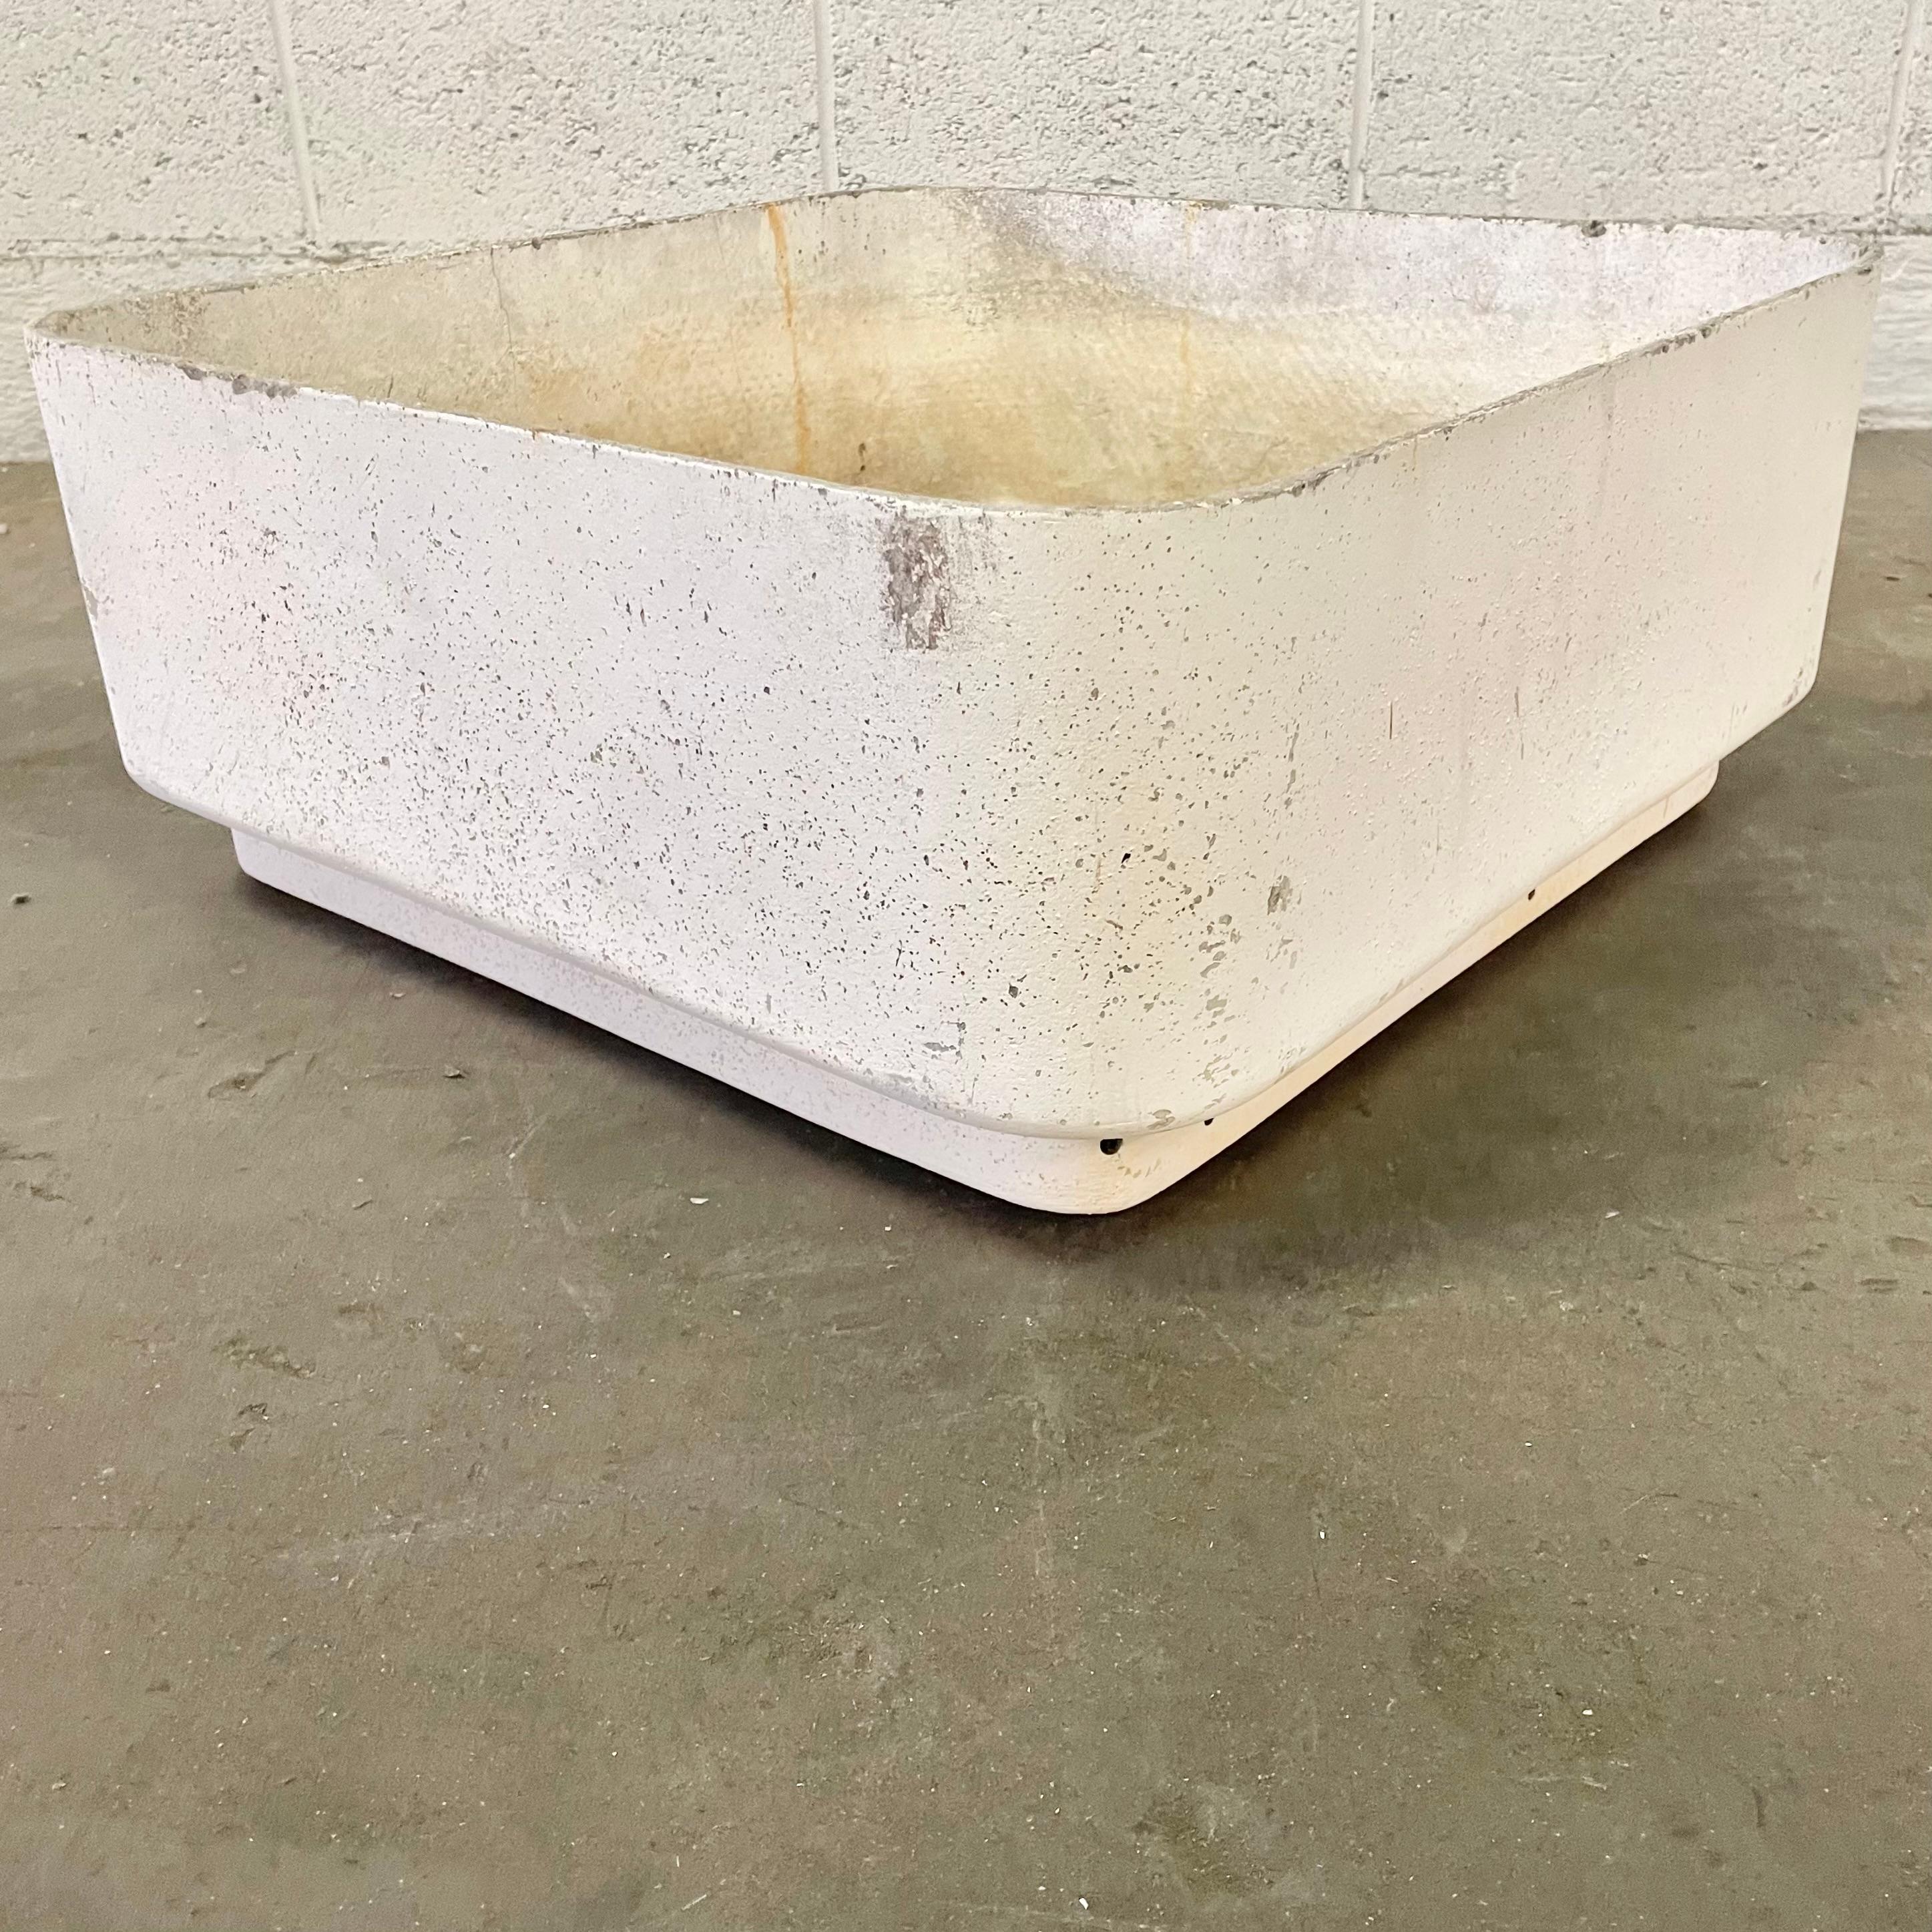 Willy Guhl White Basin Planter, 1960s Switzerland In Good Condition For Sale In Los Angeles, CA